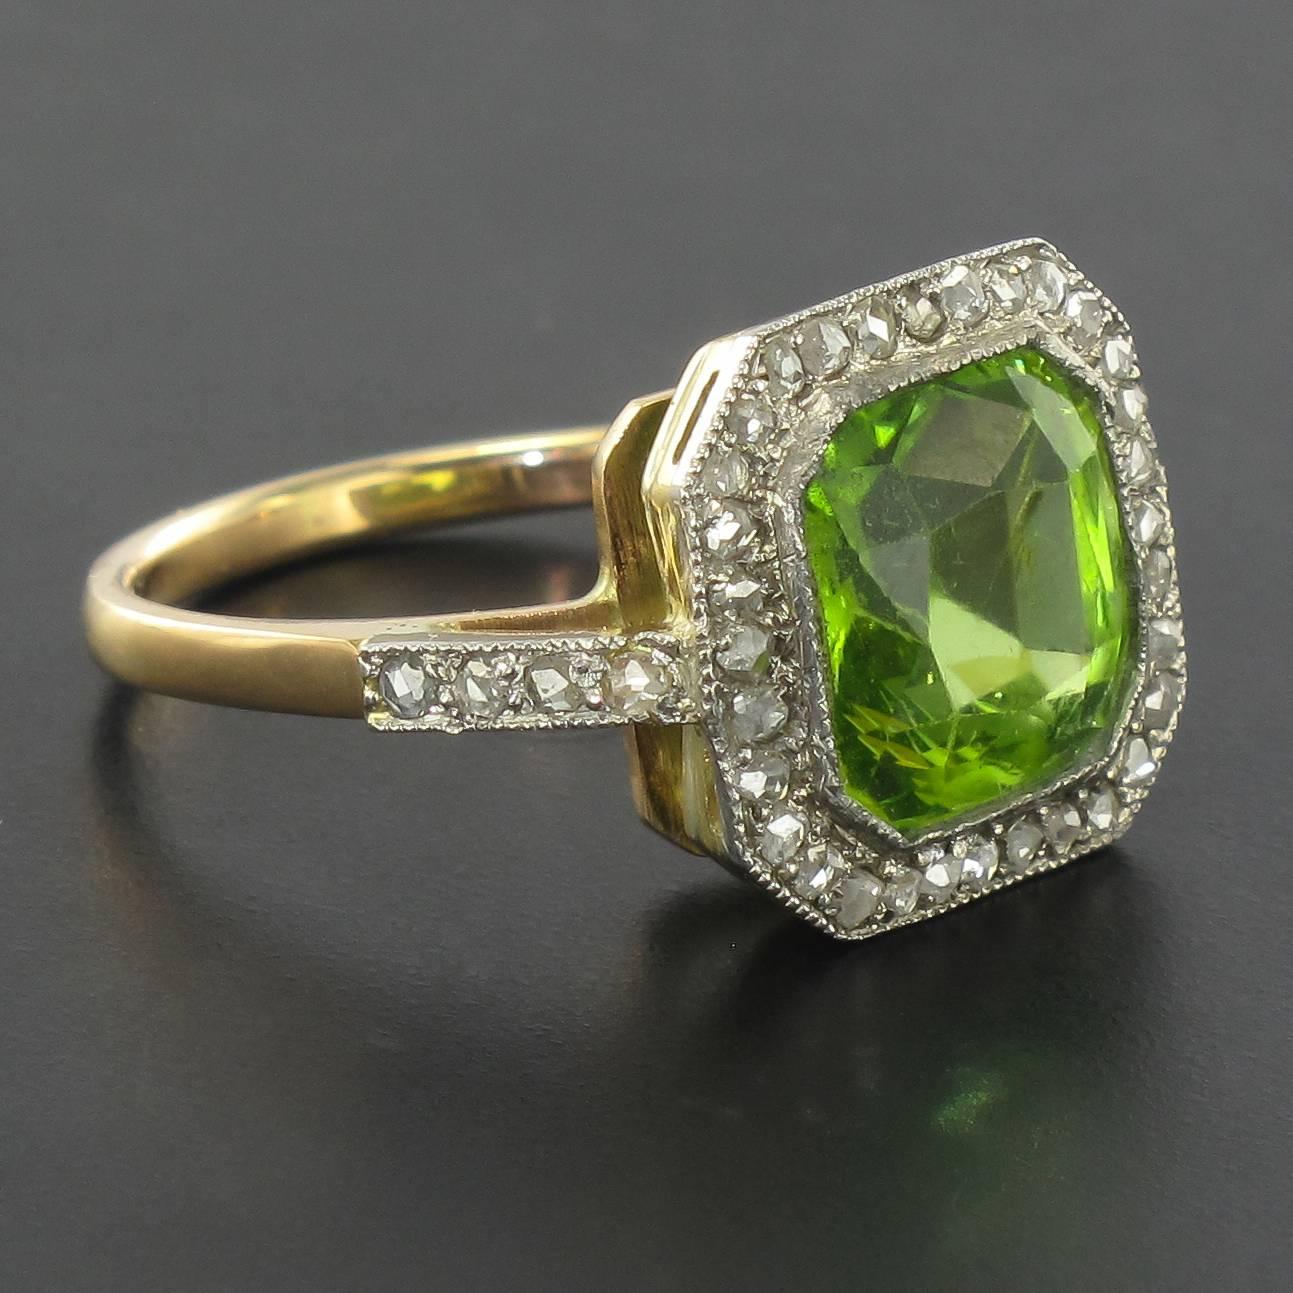 Ring in 18 carat yellow gold. 

An elegant antique ring that is bezel set with an emerald cut faceted Peridot surrounded by rose cut diamonds in a beaded bezel setting. The beginning of the ring band is set on each side with a line of small rose